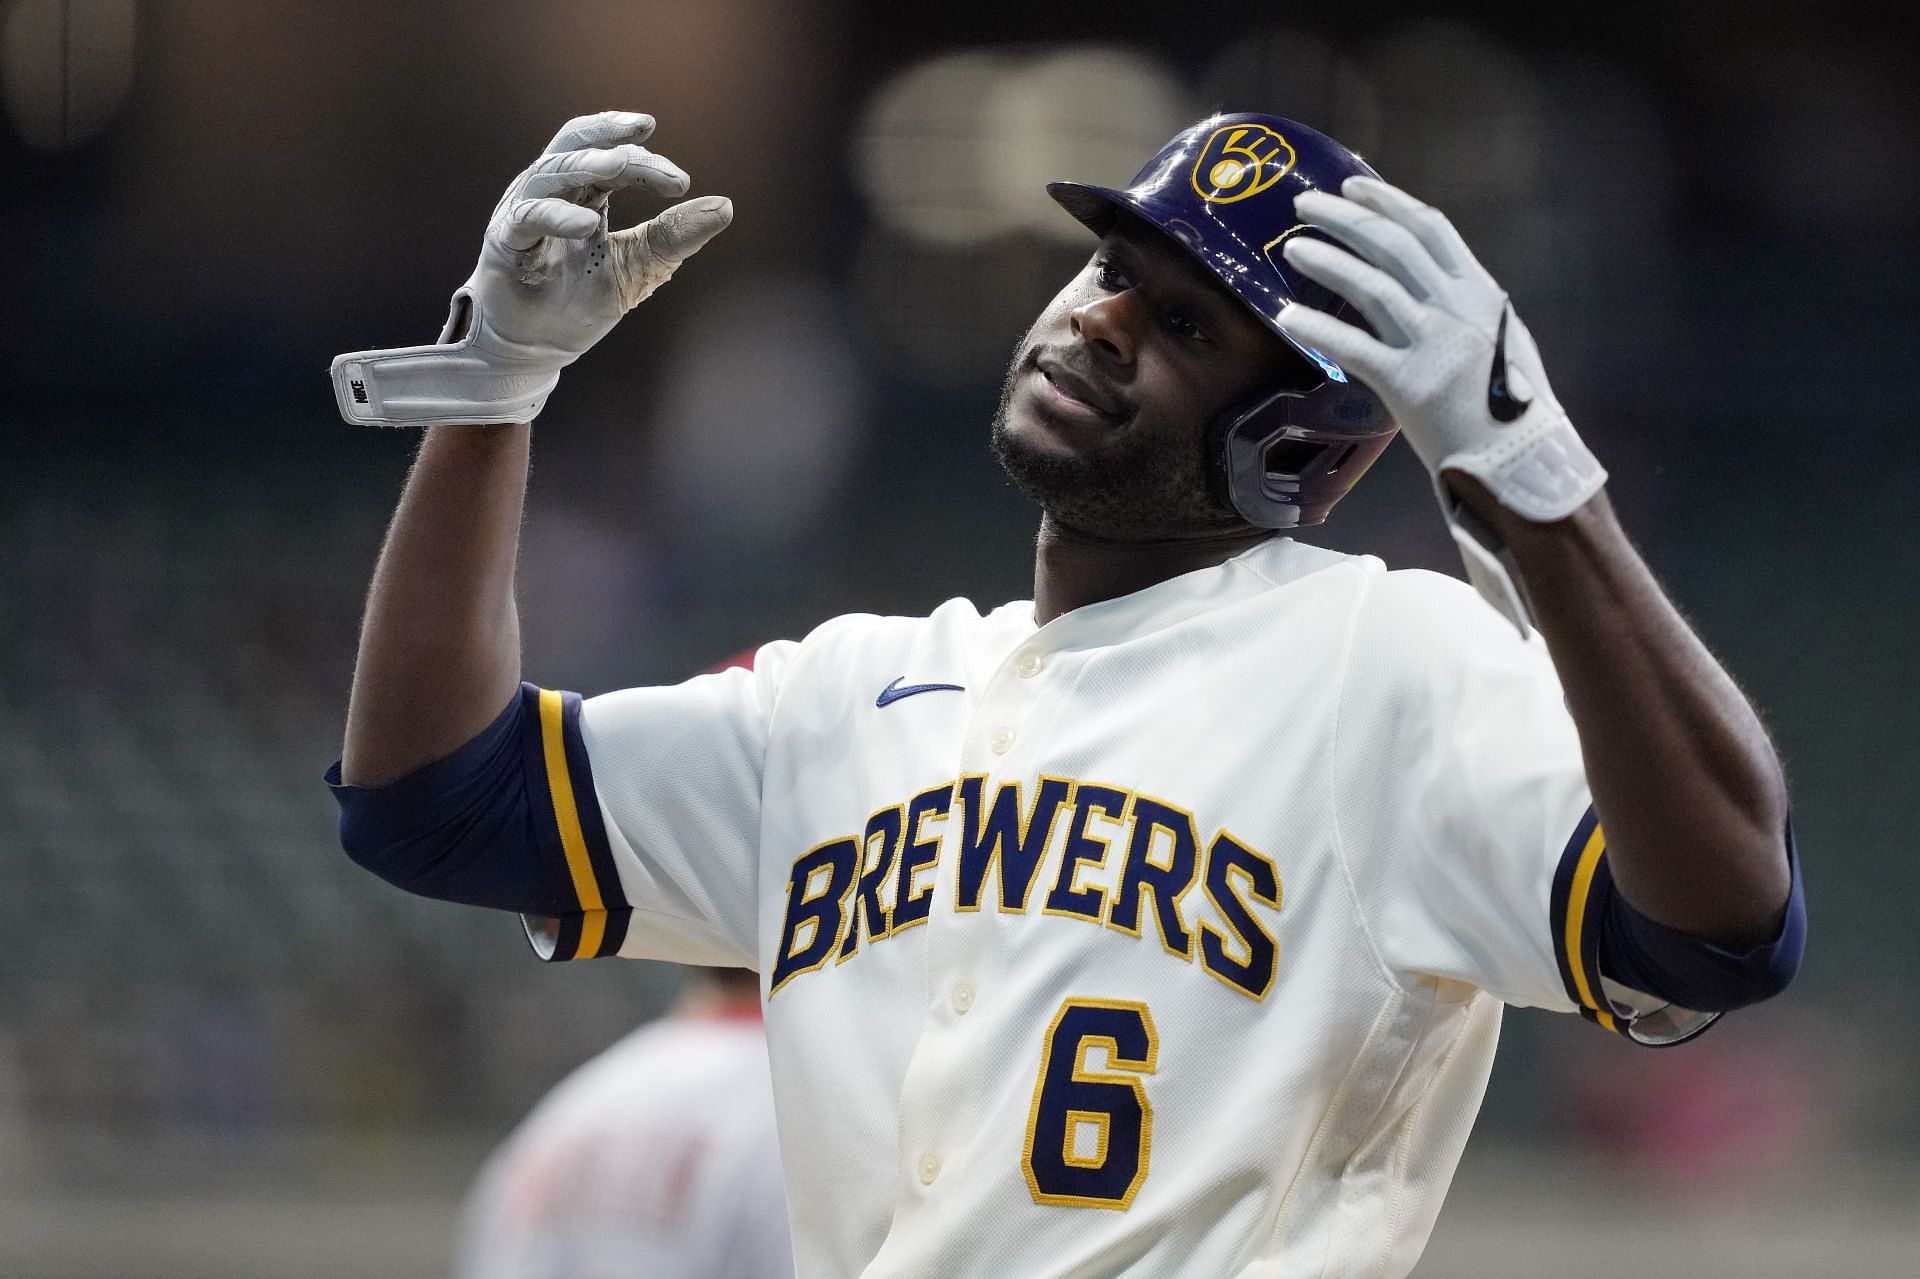 Milwaukee Brewers outfielder Lorenzo Cain had a painful experience while fielding a base hit against the New York Mets on Thursday